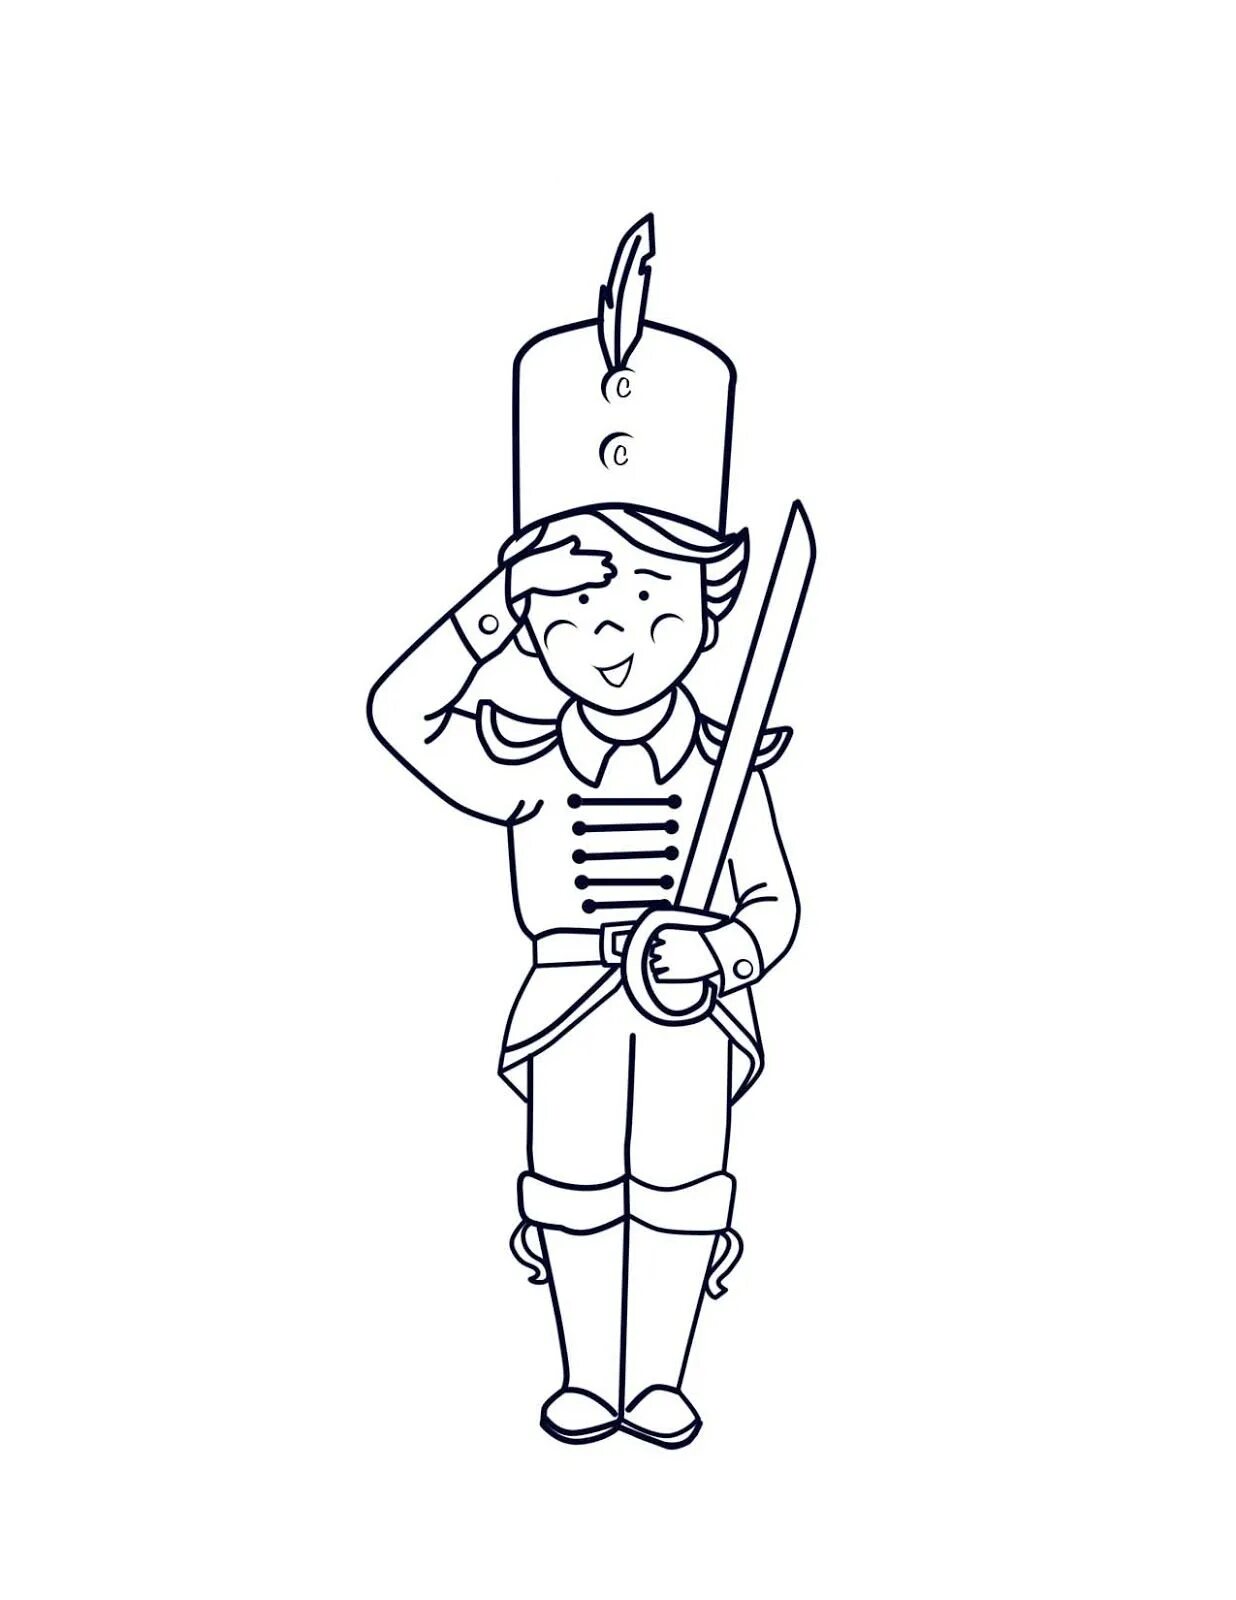 Soldier small #2